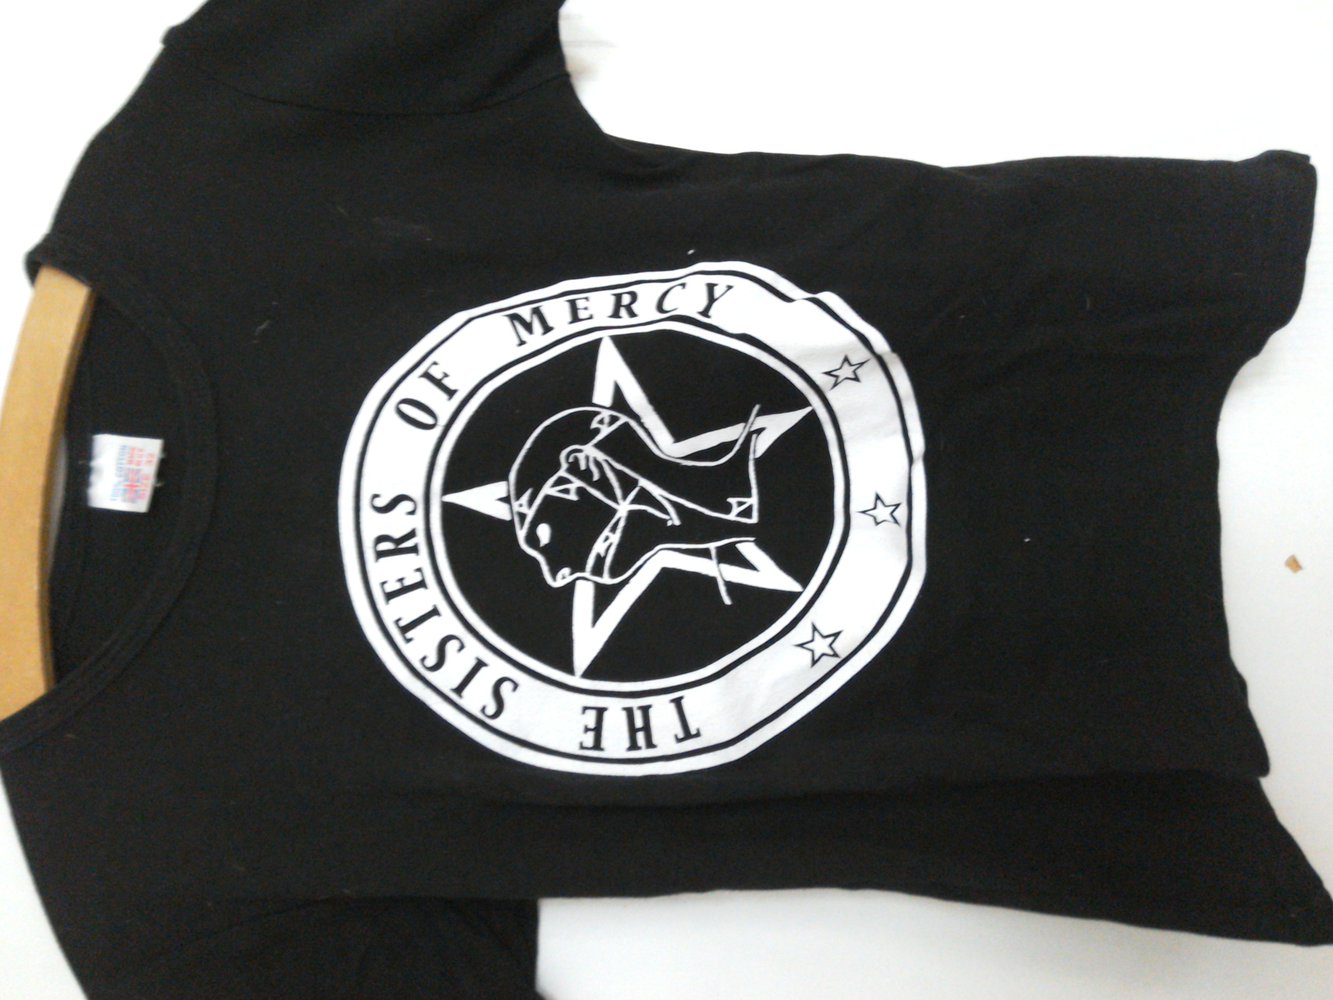 The Sisters of Mercy Band Shirt